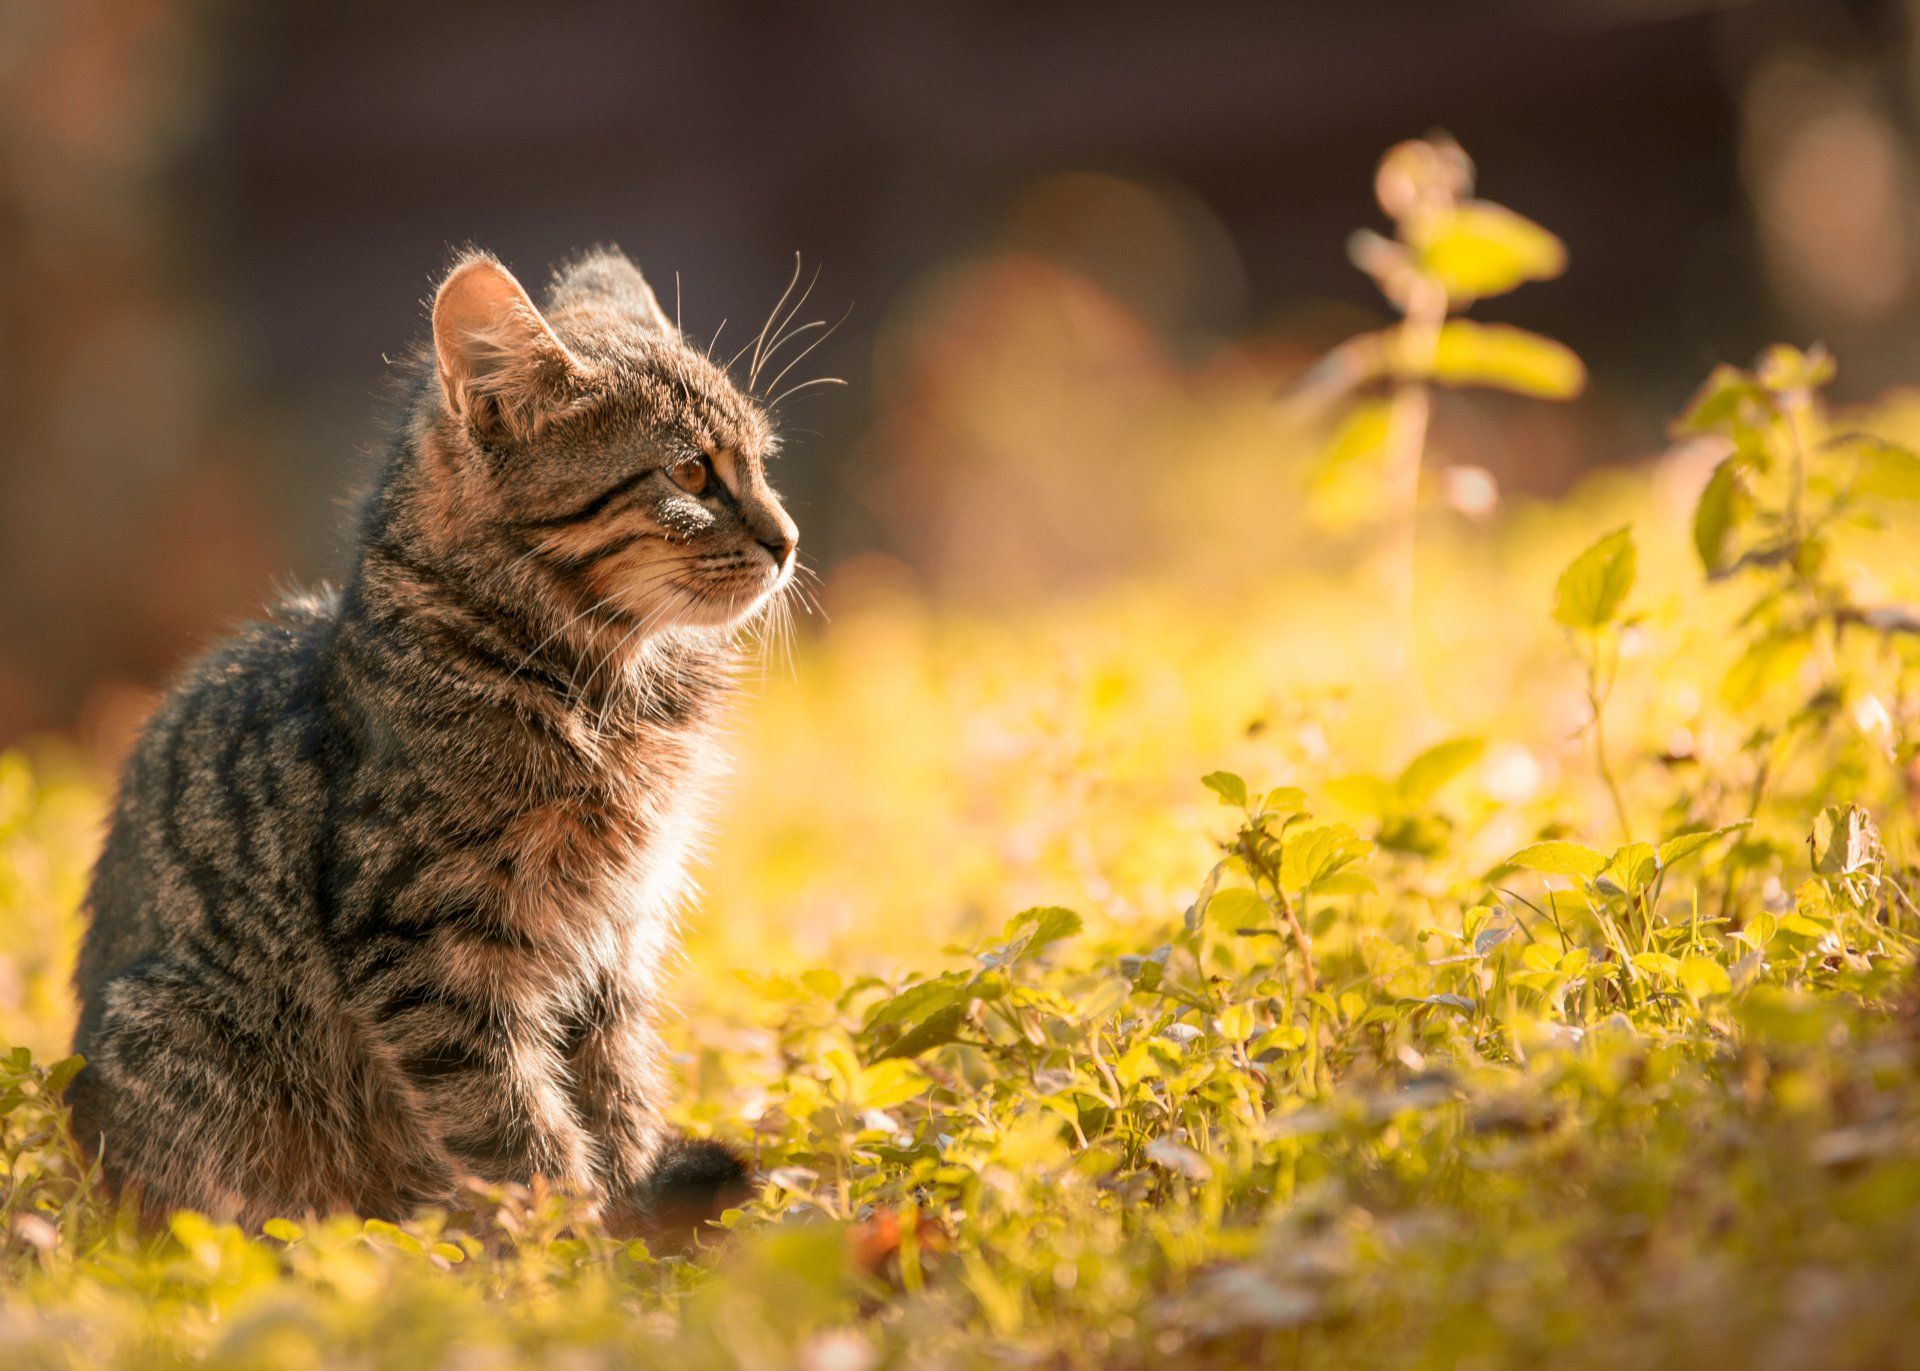 A kitten is sitting in the grass looking up at the sky.